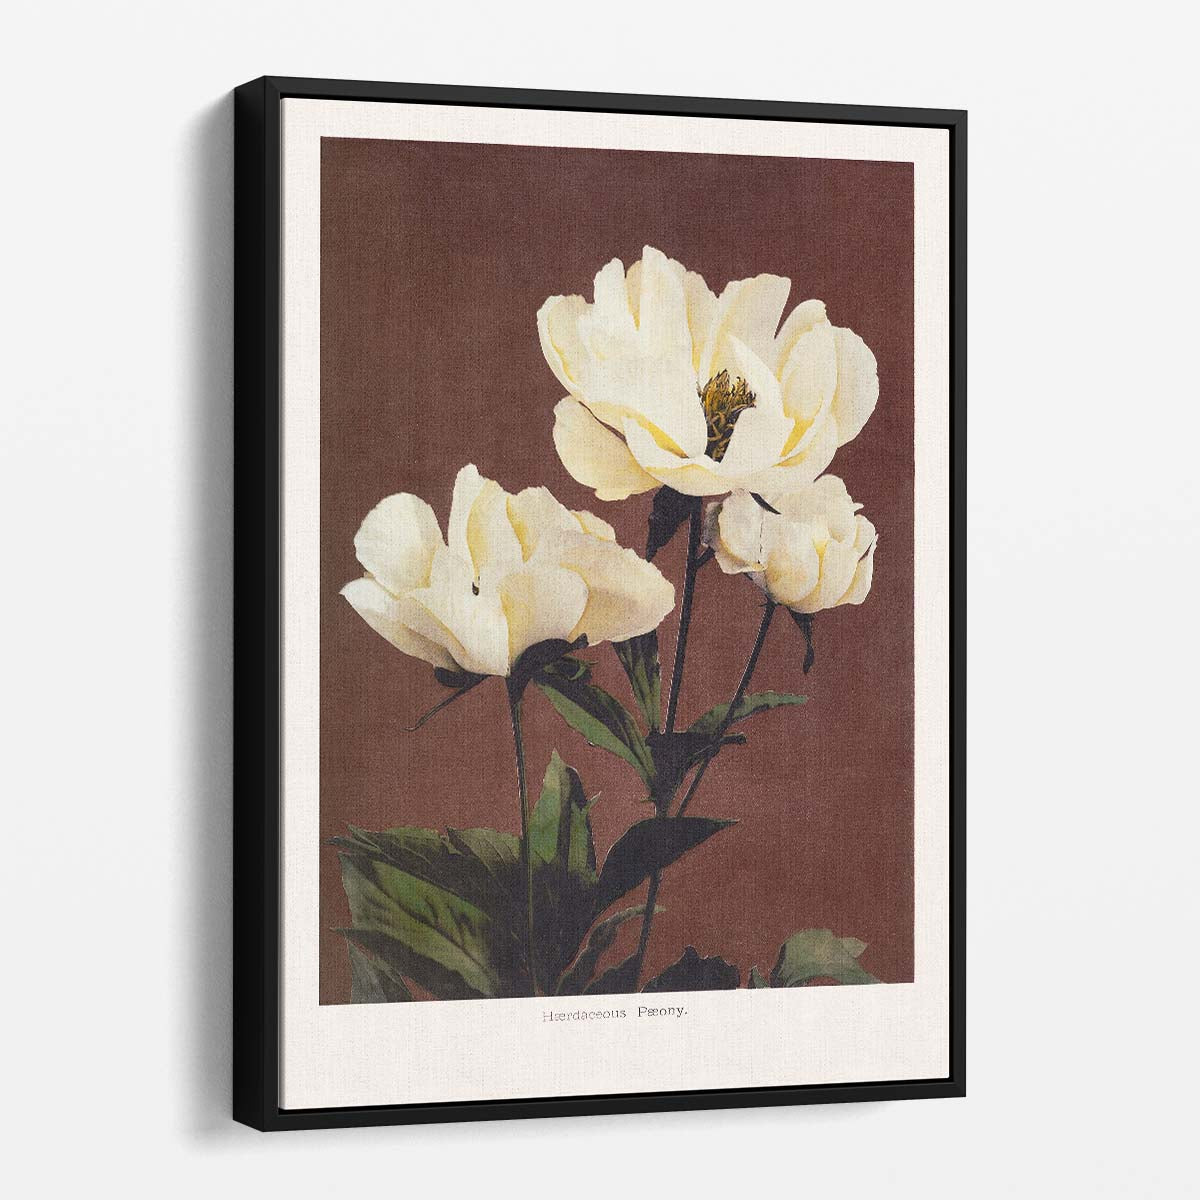 Vintage Japanese Peony Illustration Wall Art by Ohara Koson by Luxuriance Designs, made in USA